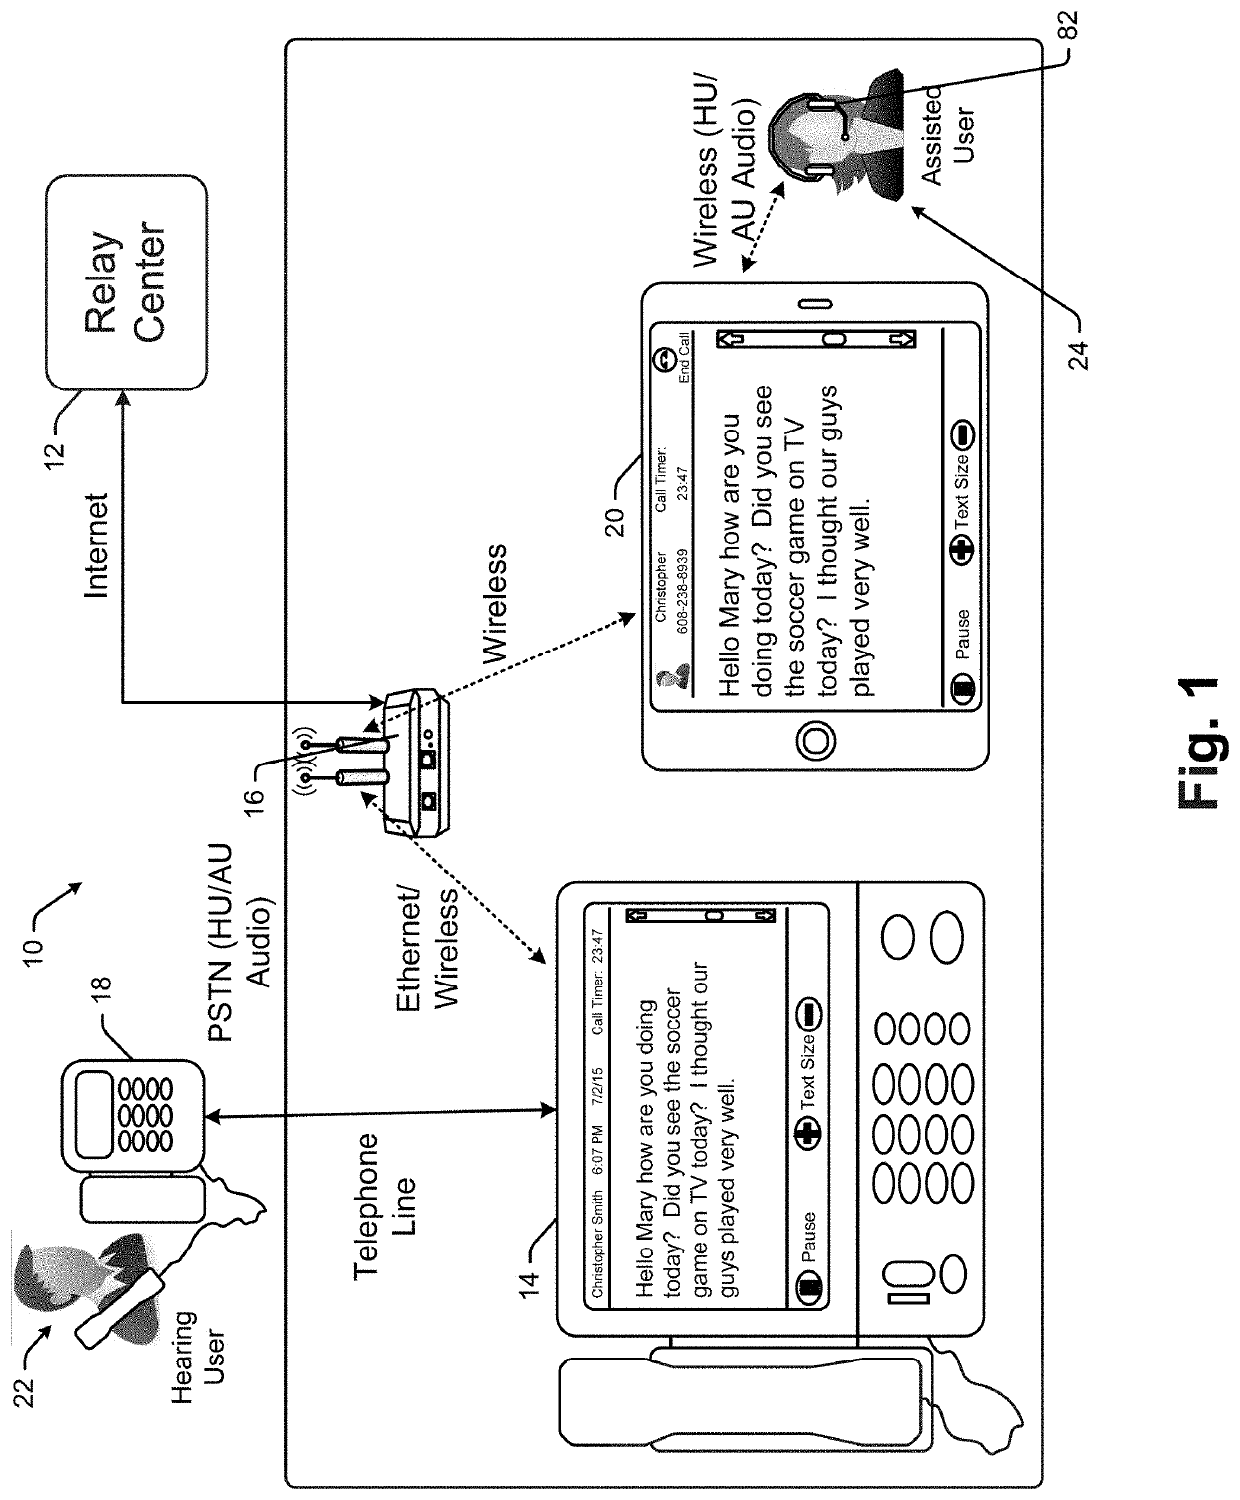 Text assisted telphony on wireless device method and apparatus